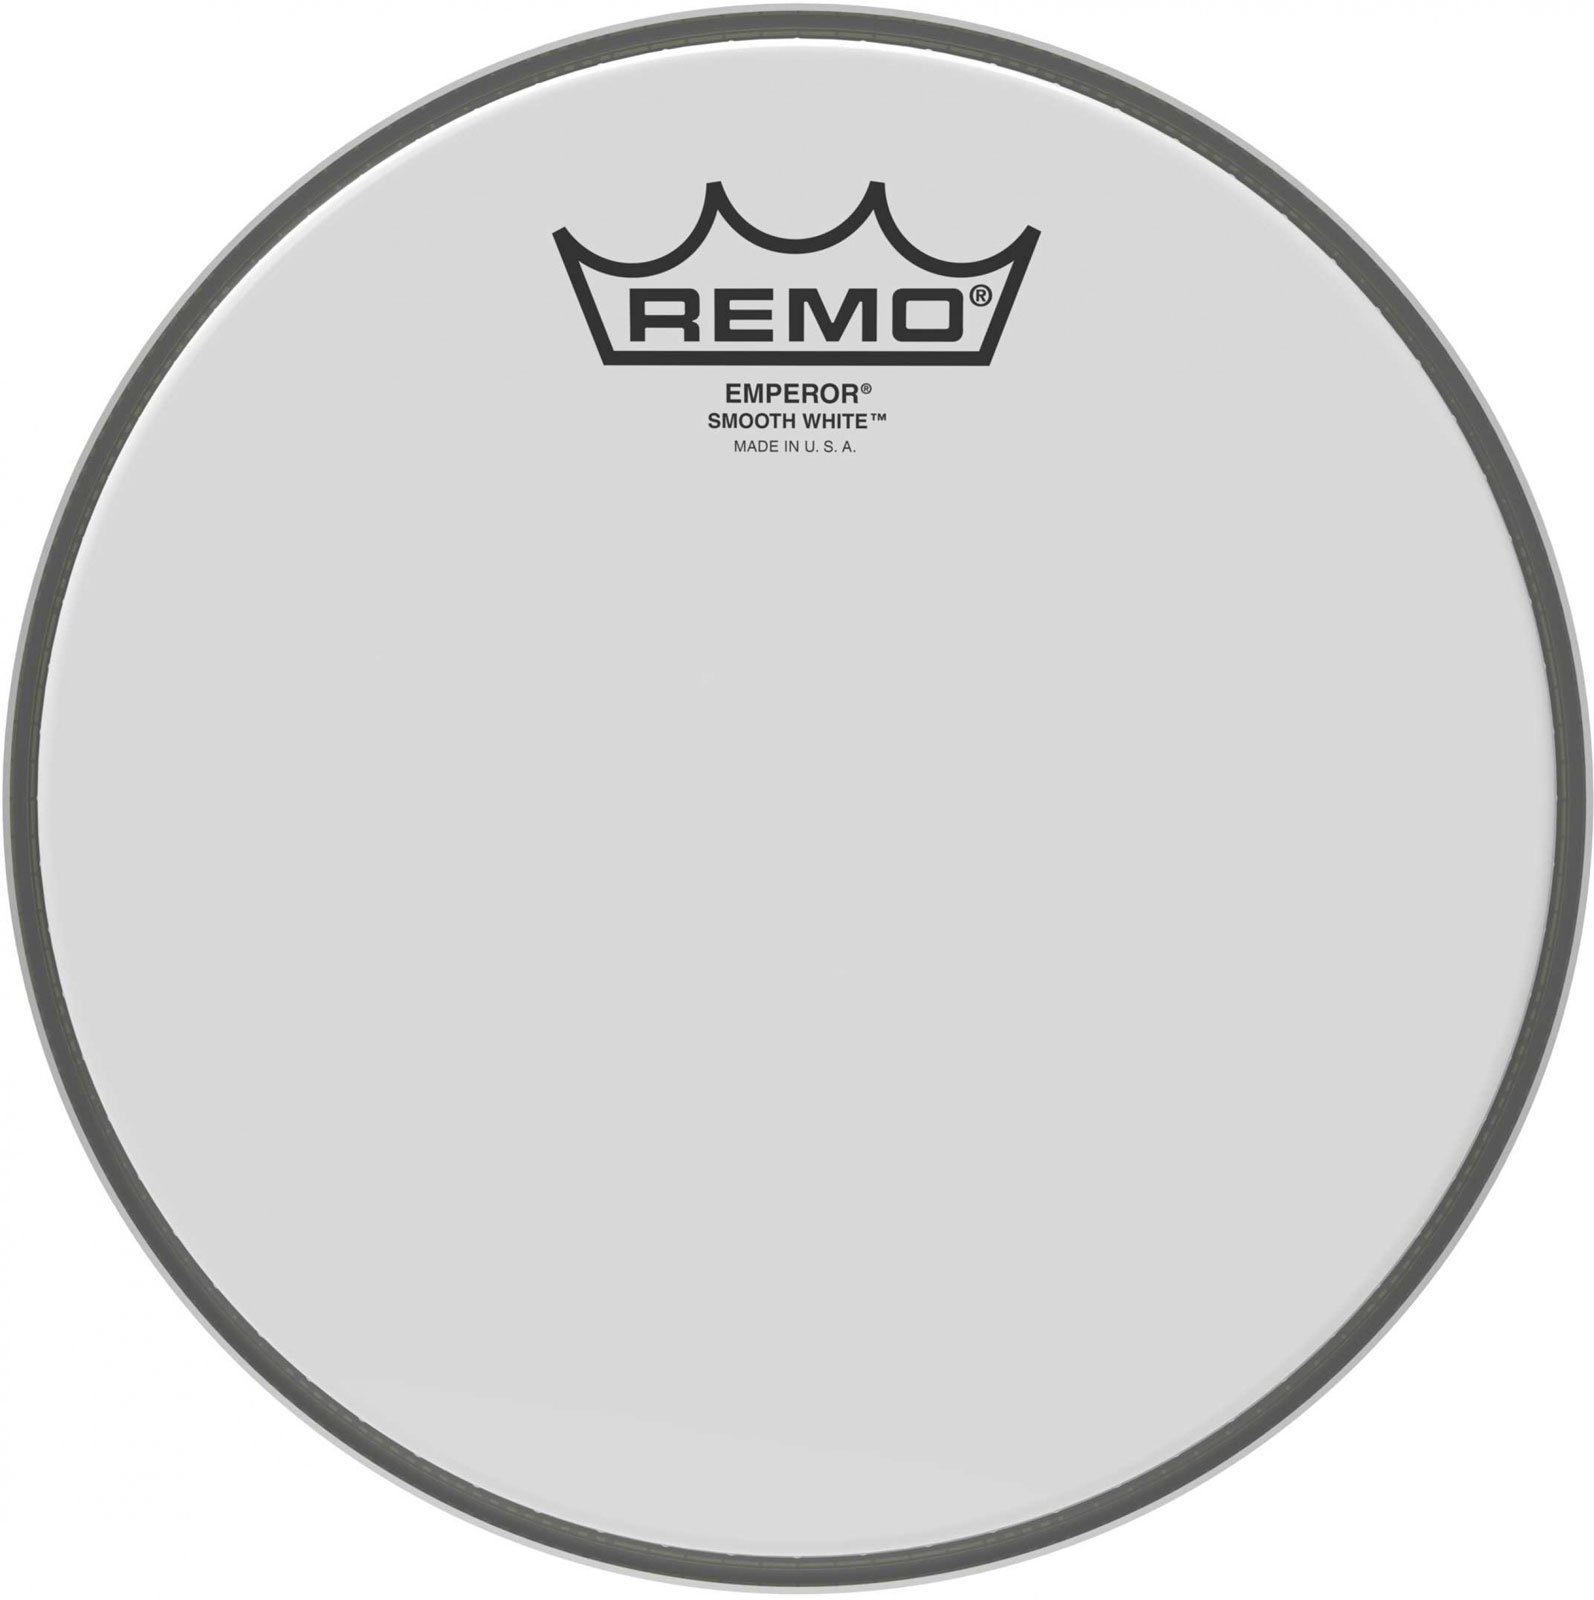 REMO BE-0208-00 EMPEROR SMOOTH WHITE 8